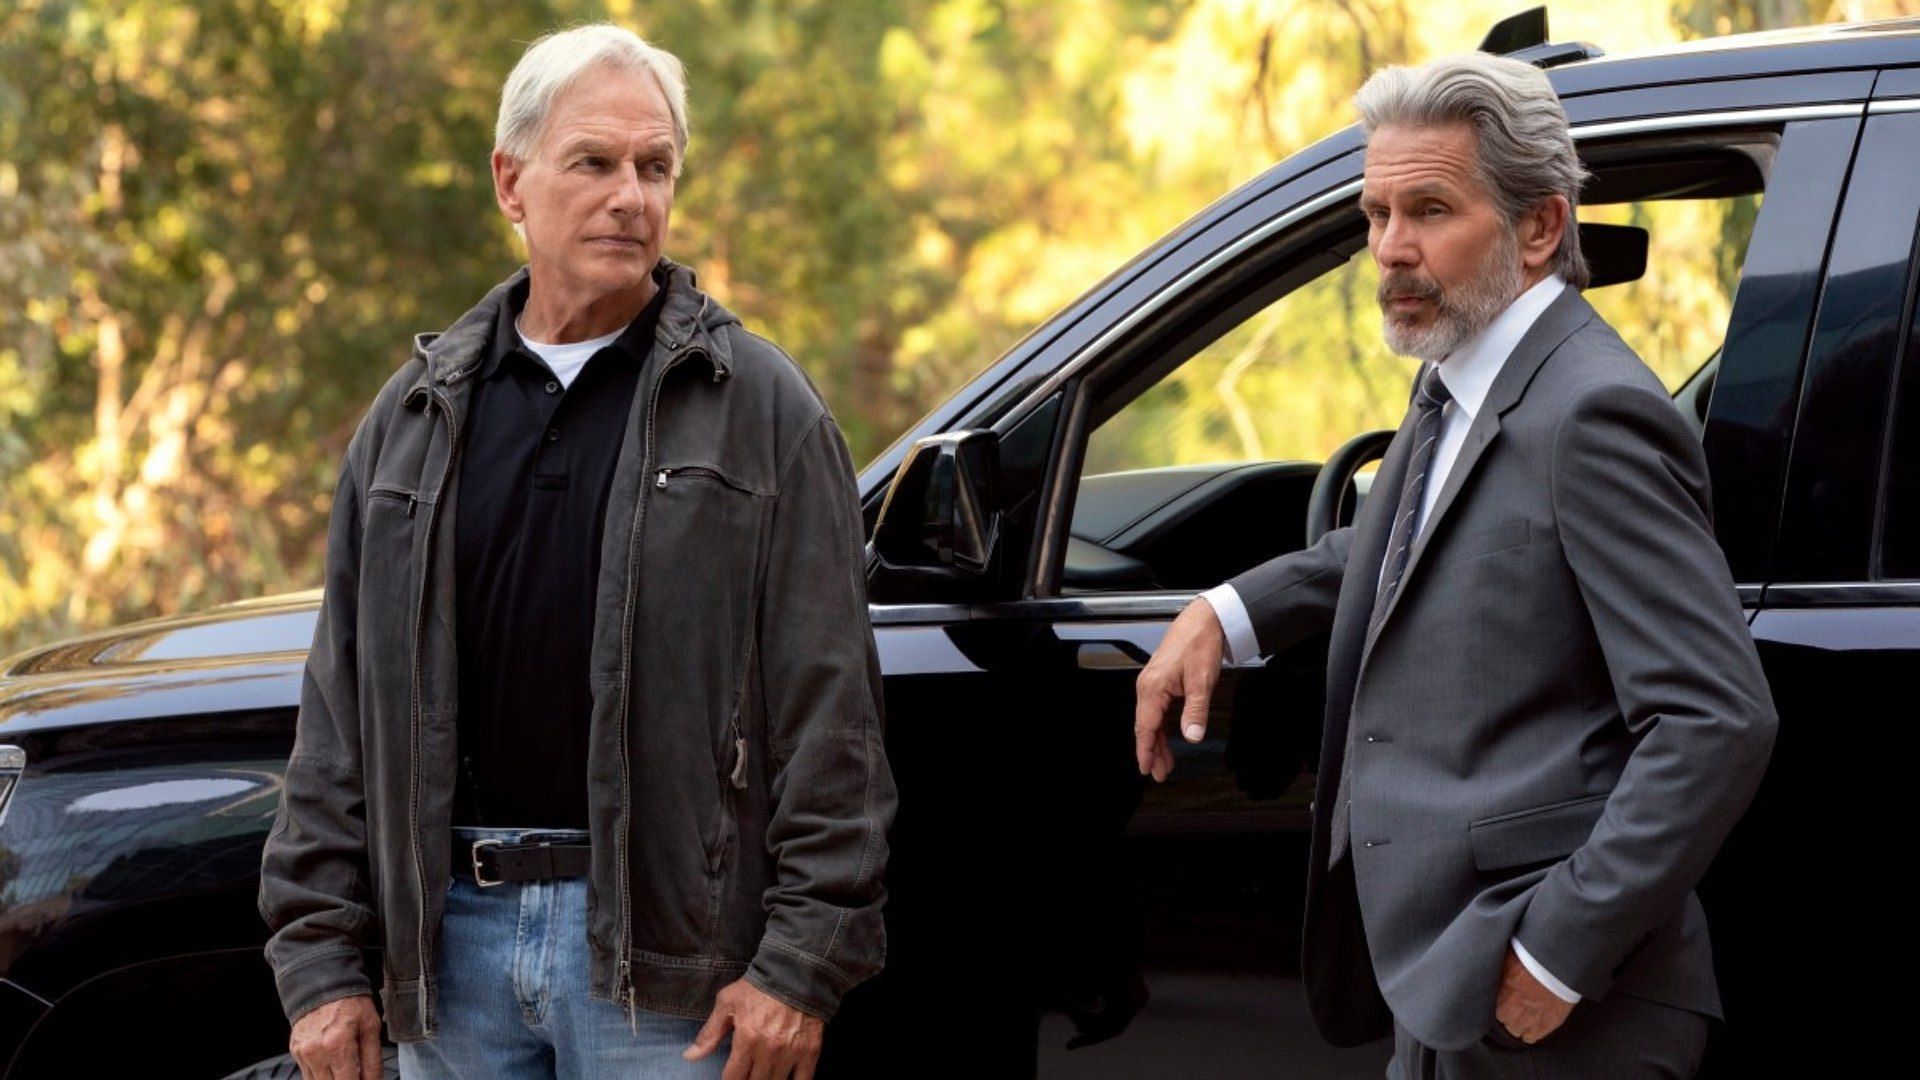 A picture of the Special Agents Gibbs and Parker (Image via Facebook/@The NCISverse)